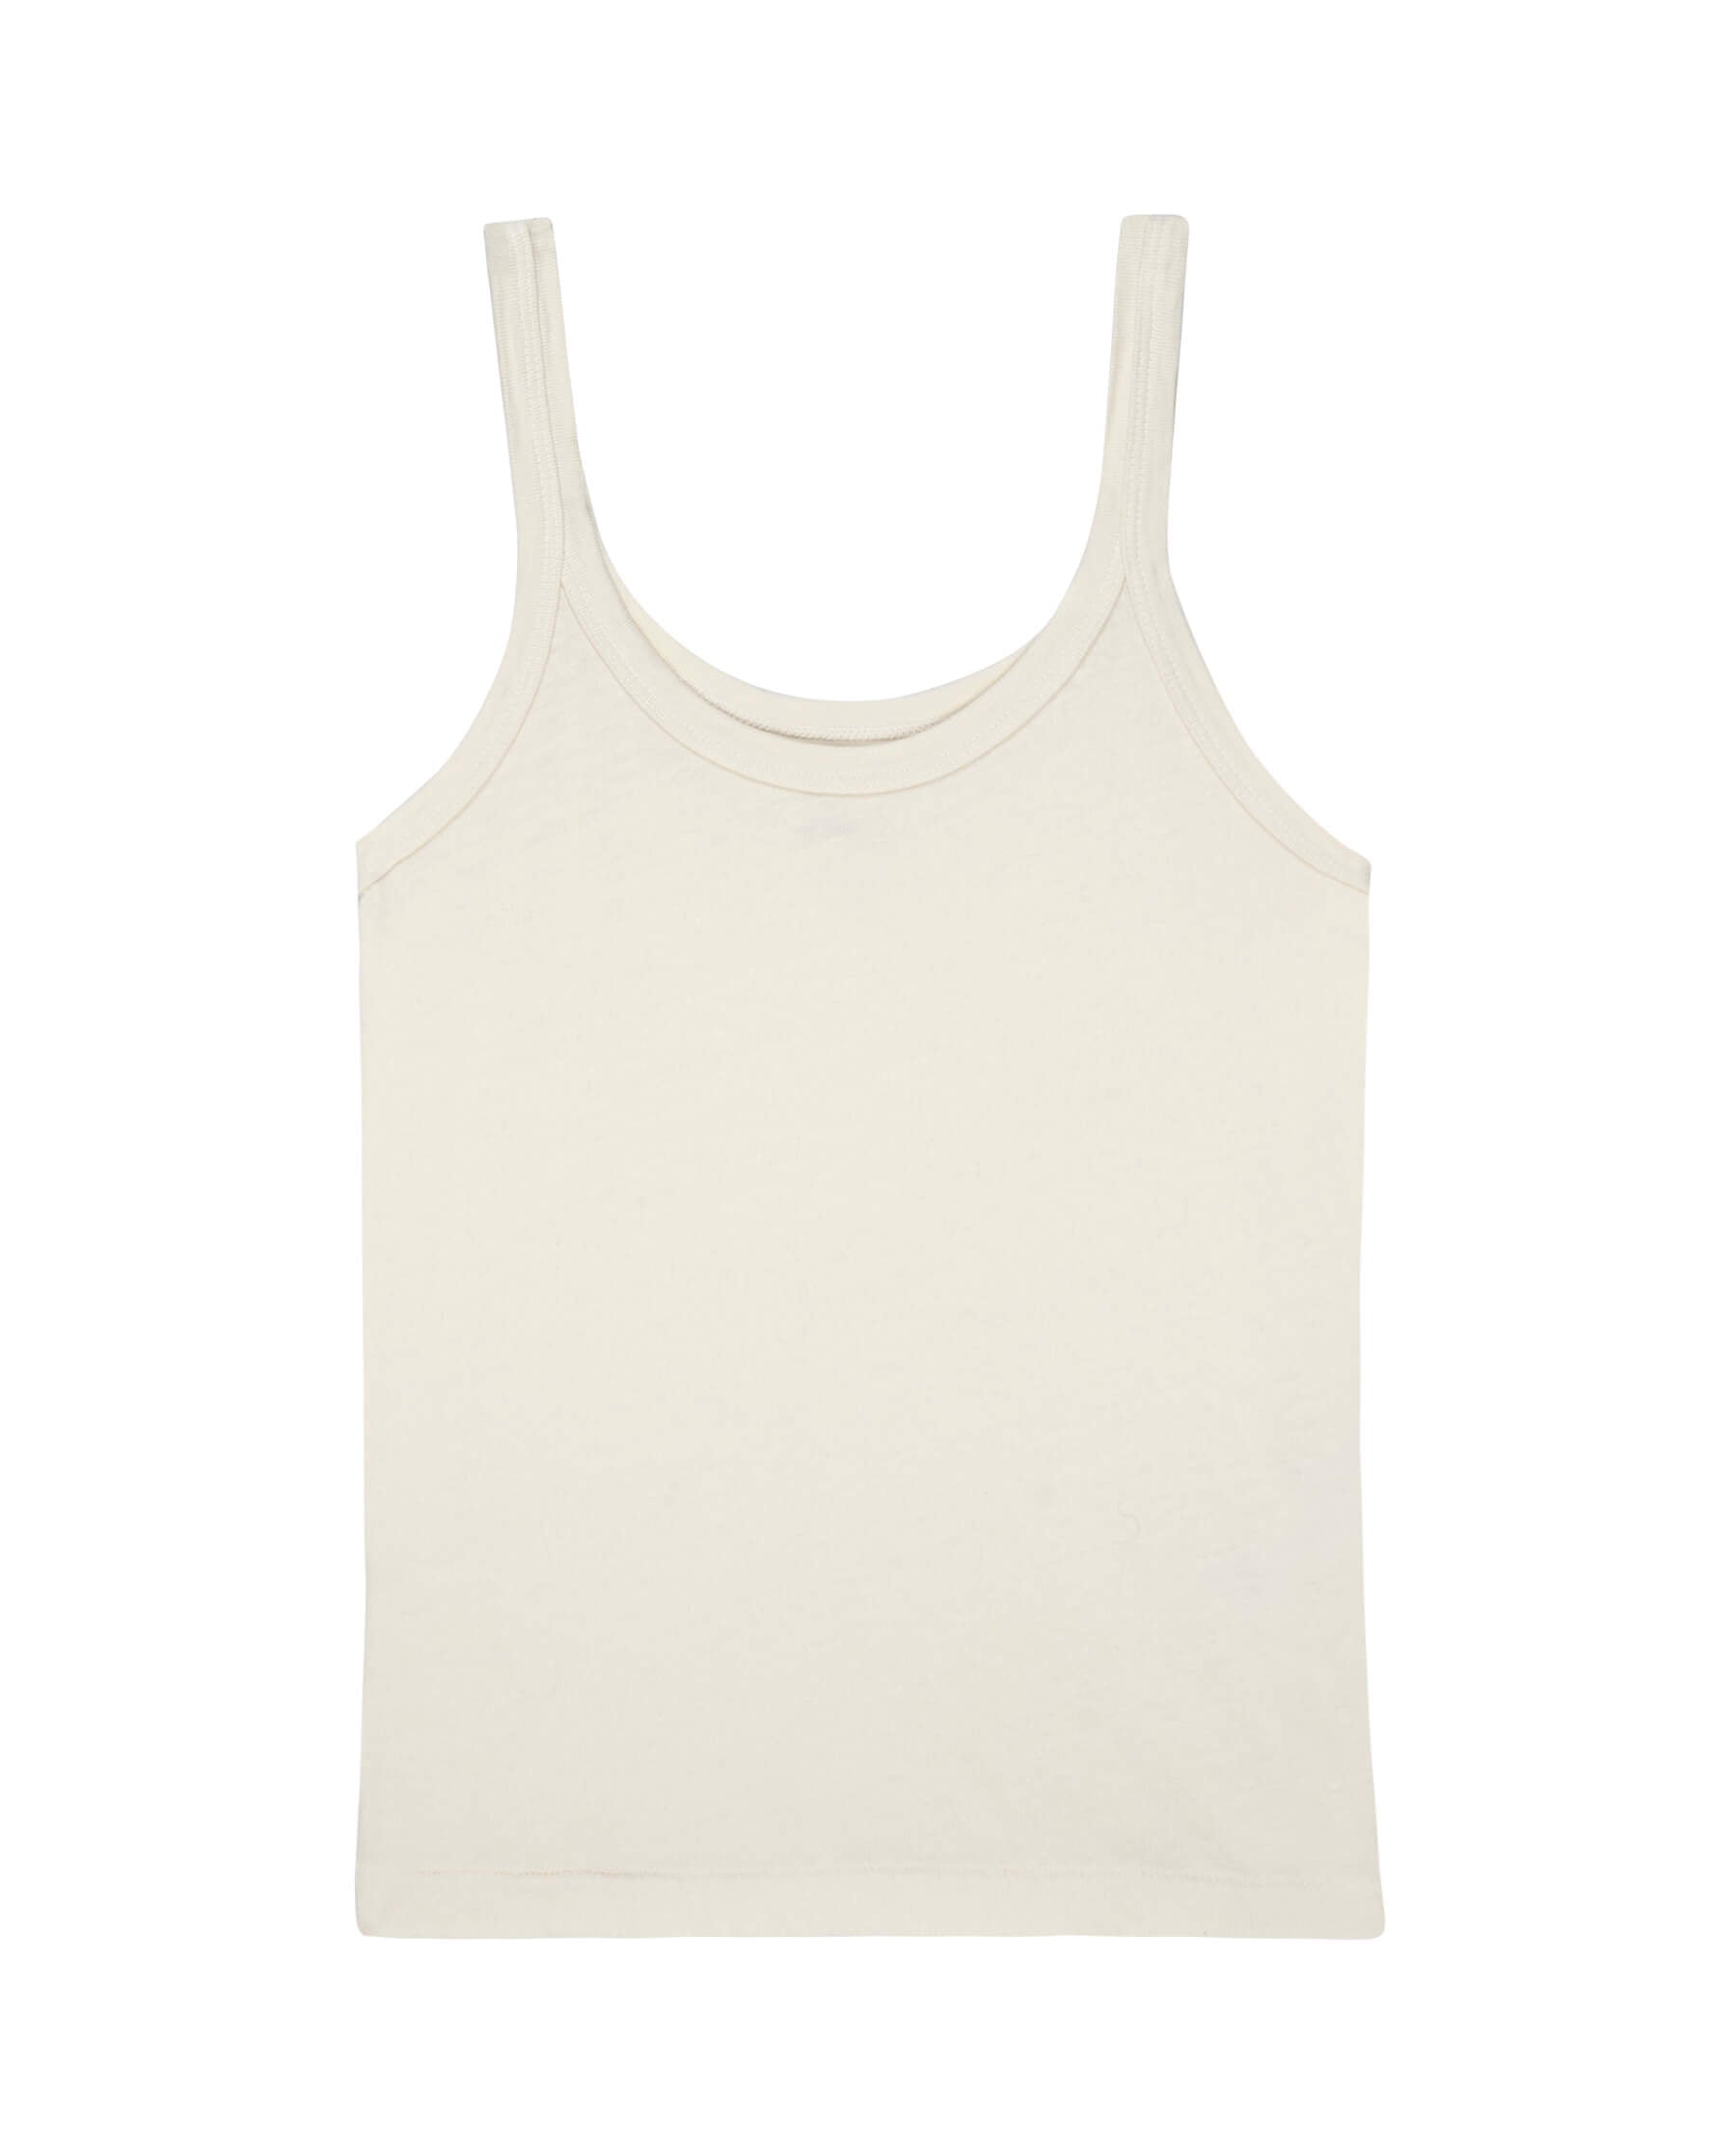 The Slim Tank. Solid -- Washed White